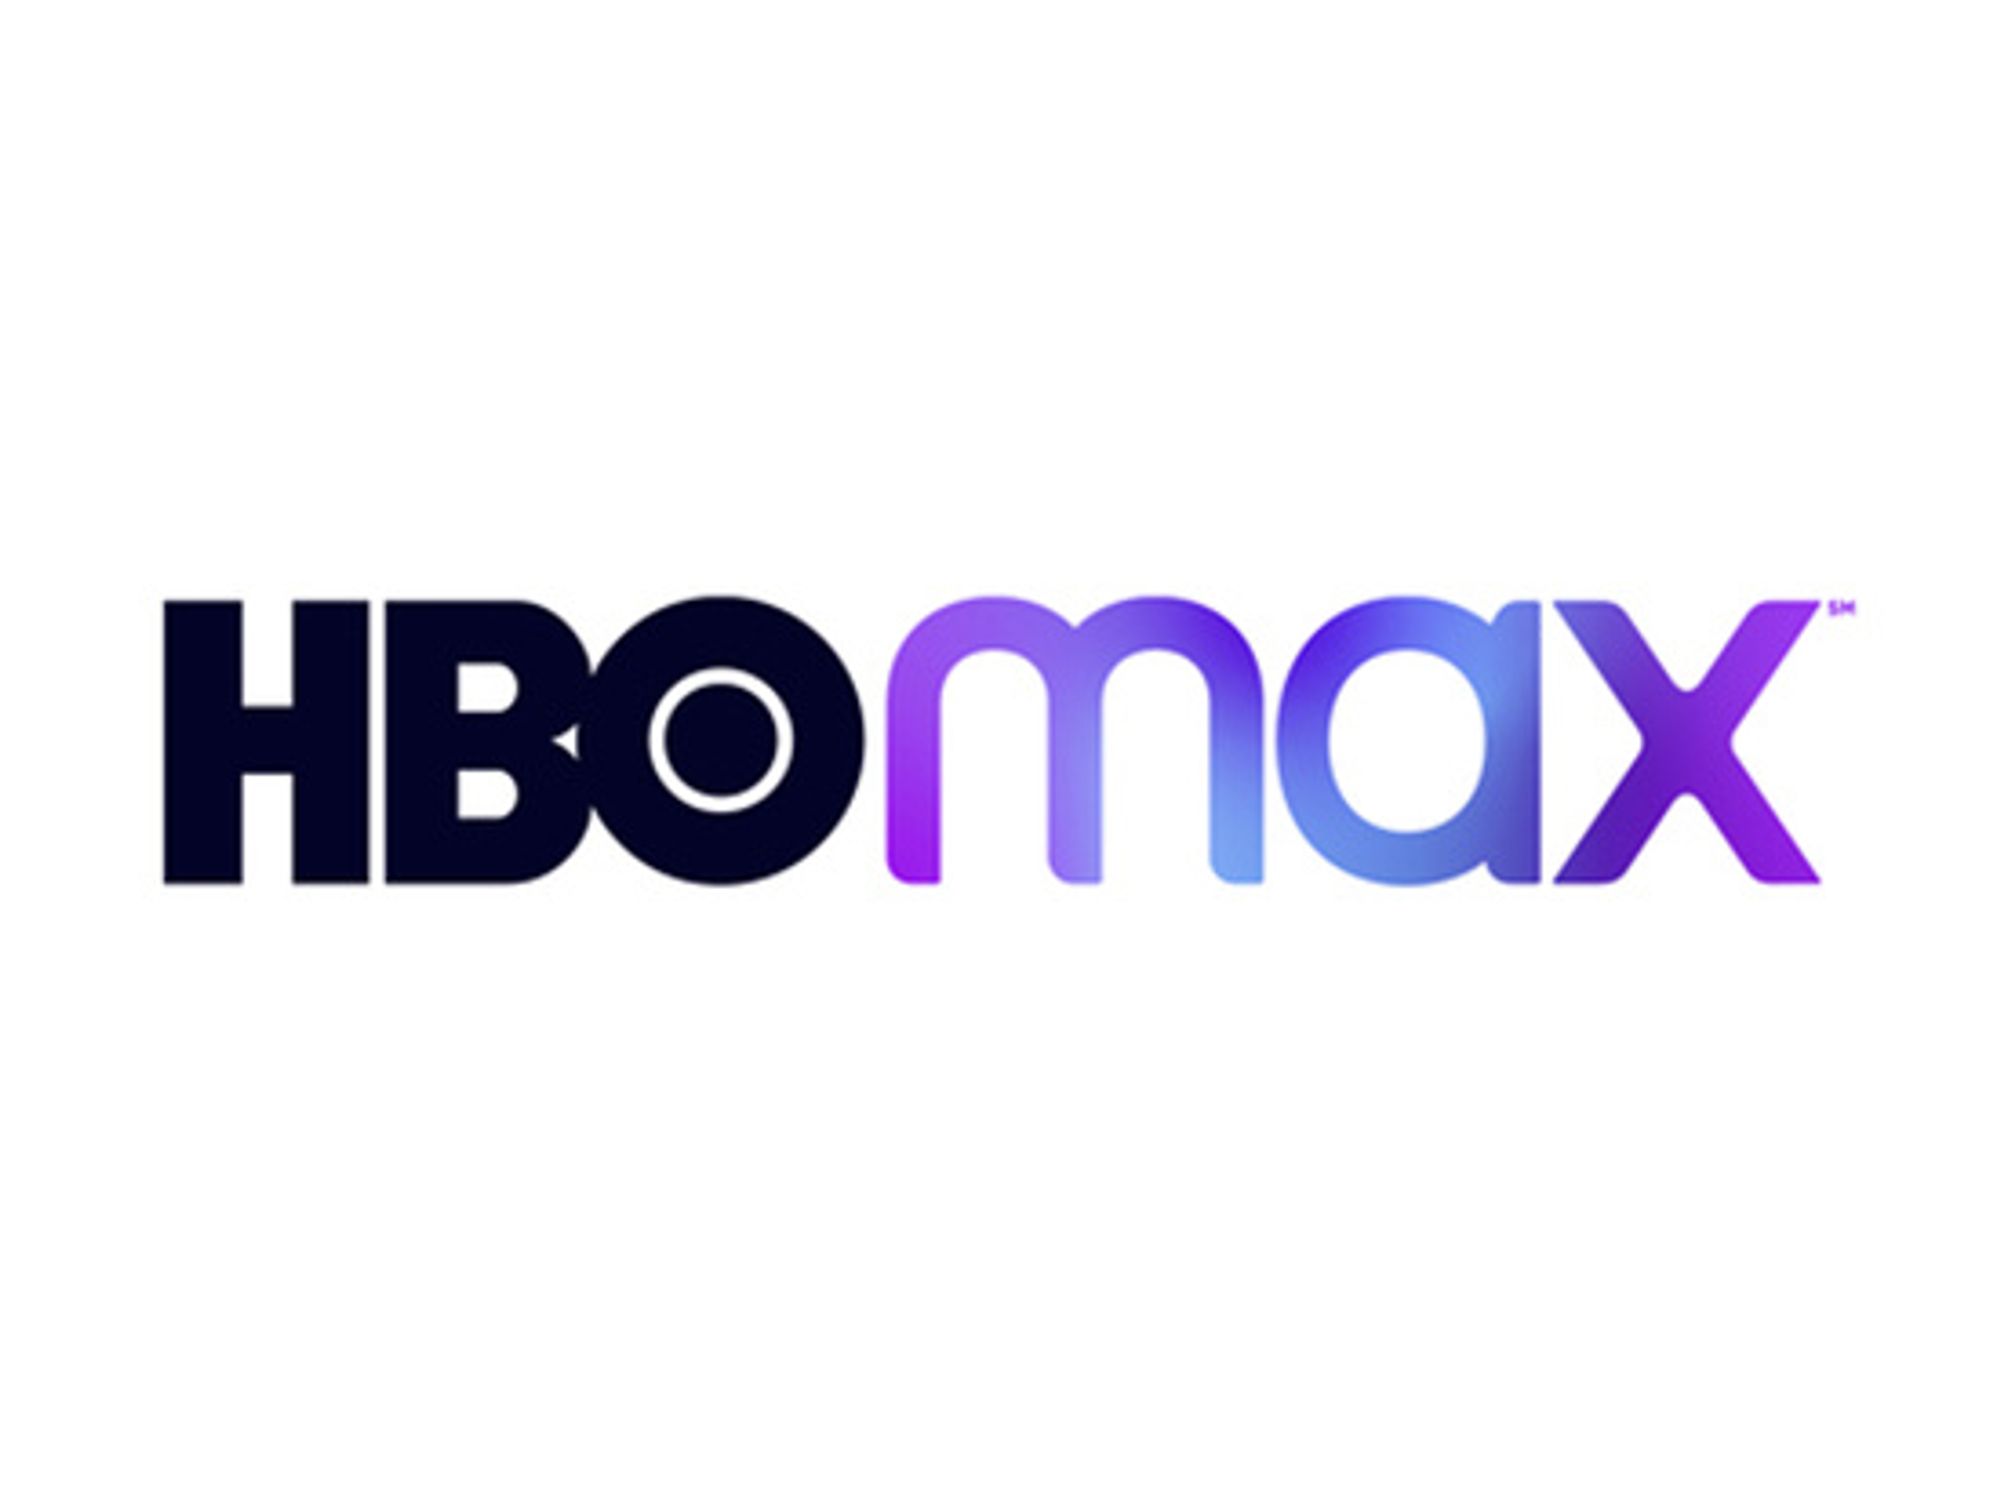 AT&T's Wild Week: John Stankey Takes Control Ahead of HBO Max Launch